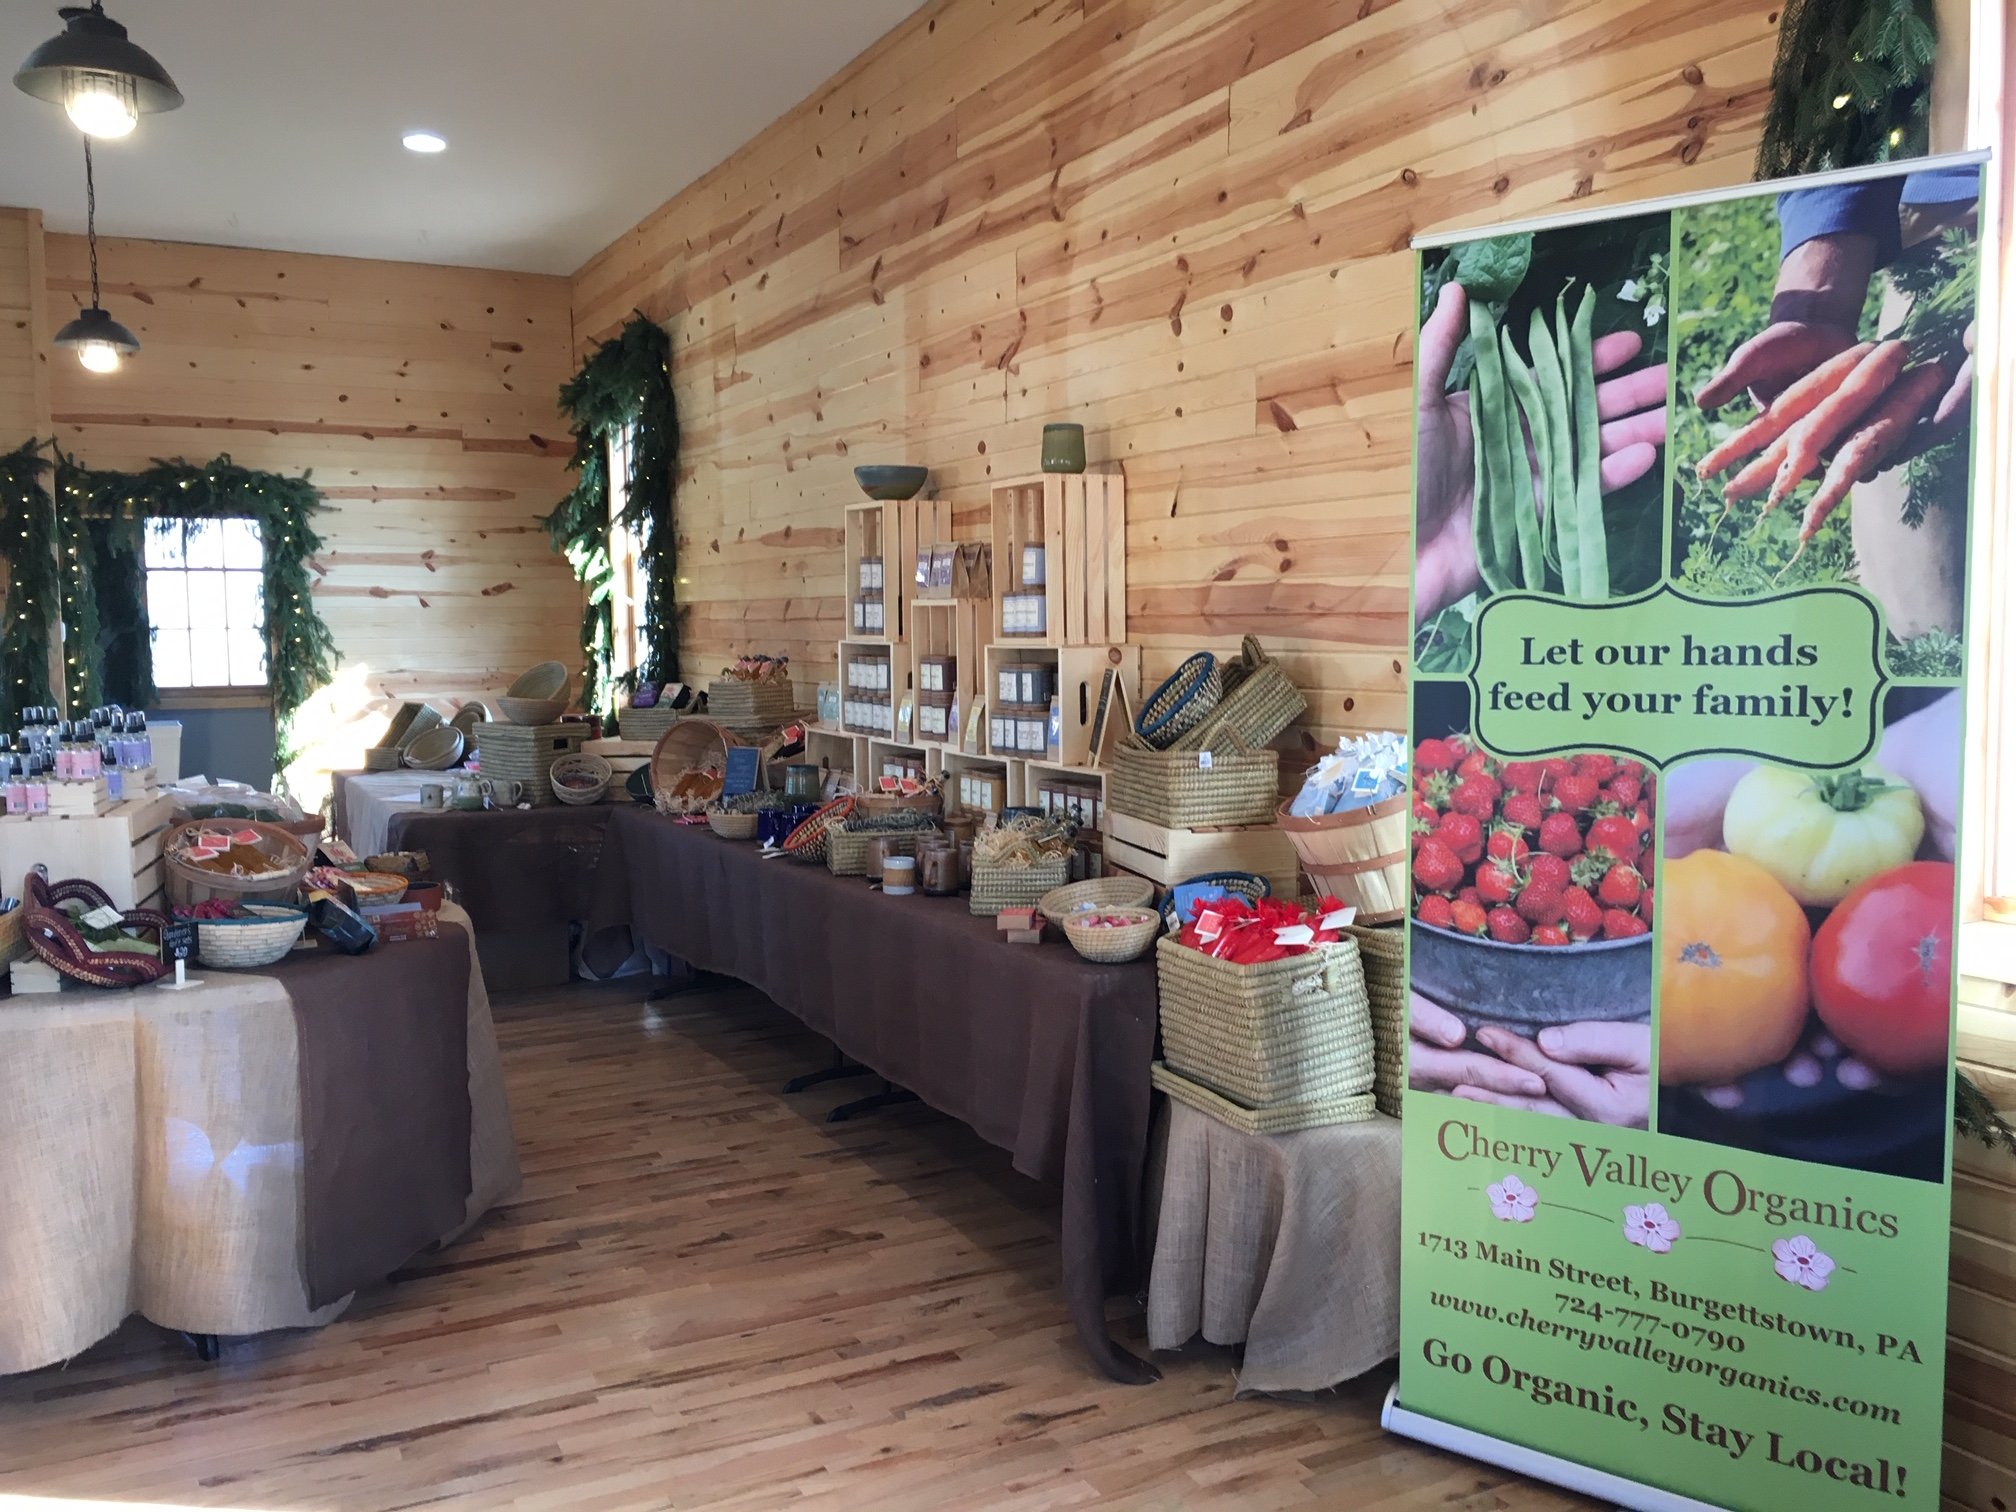 Previous Happening: Cherry Valley Organics Holiday Market!